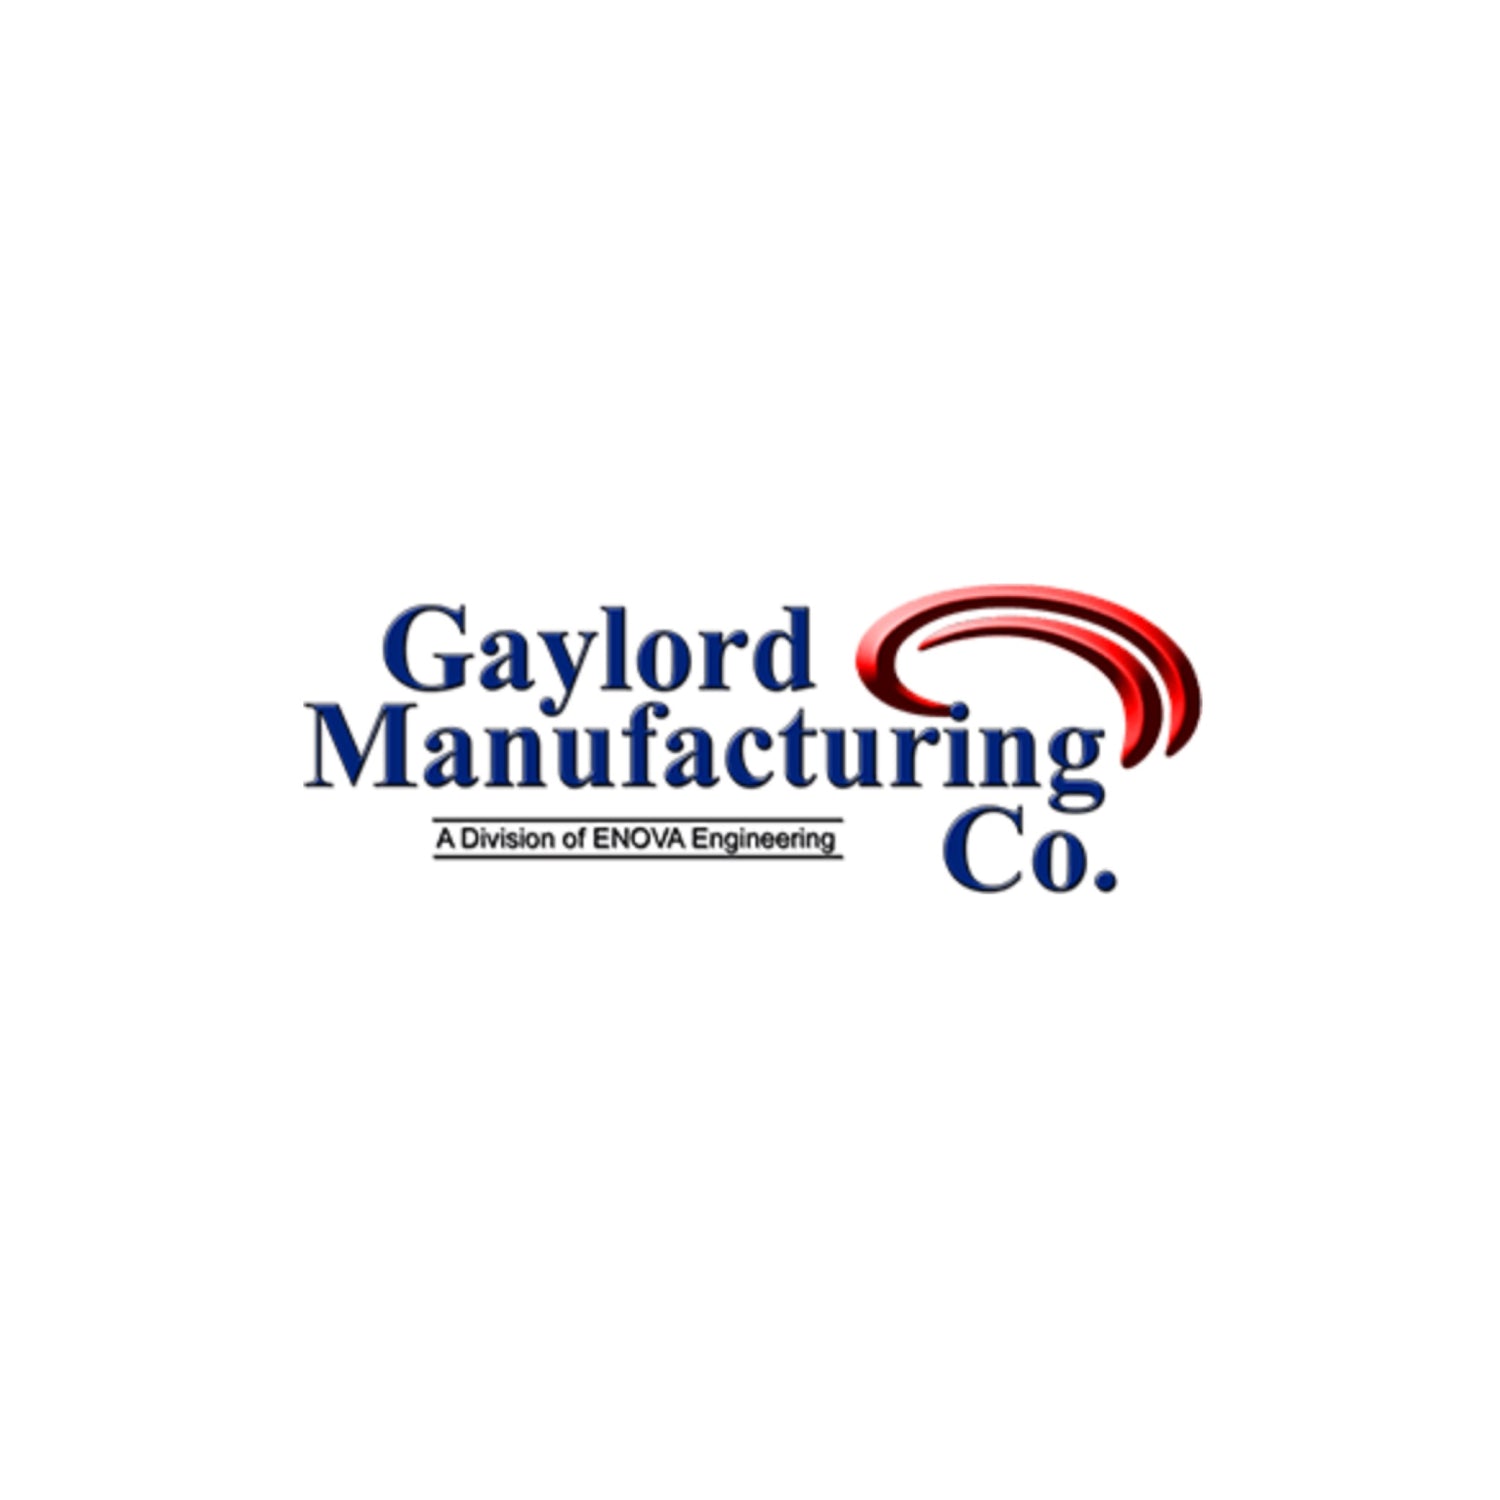 GAYLORD MANUFACTURING CO.